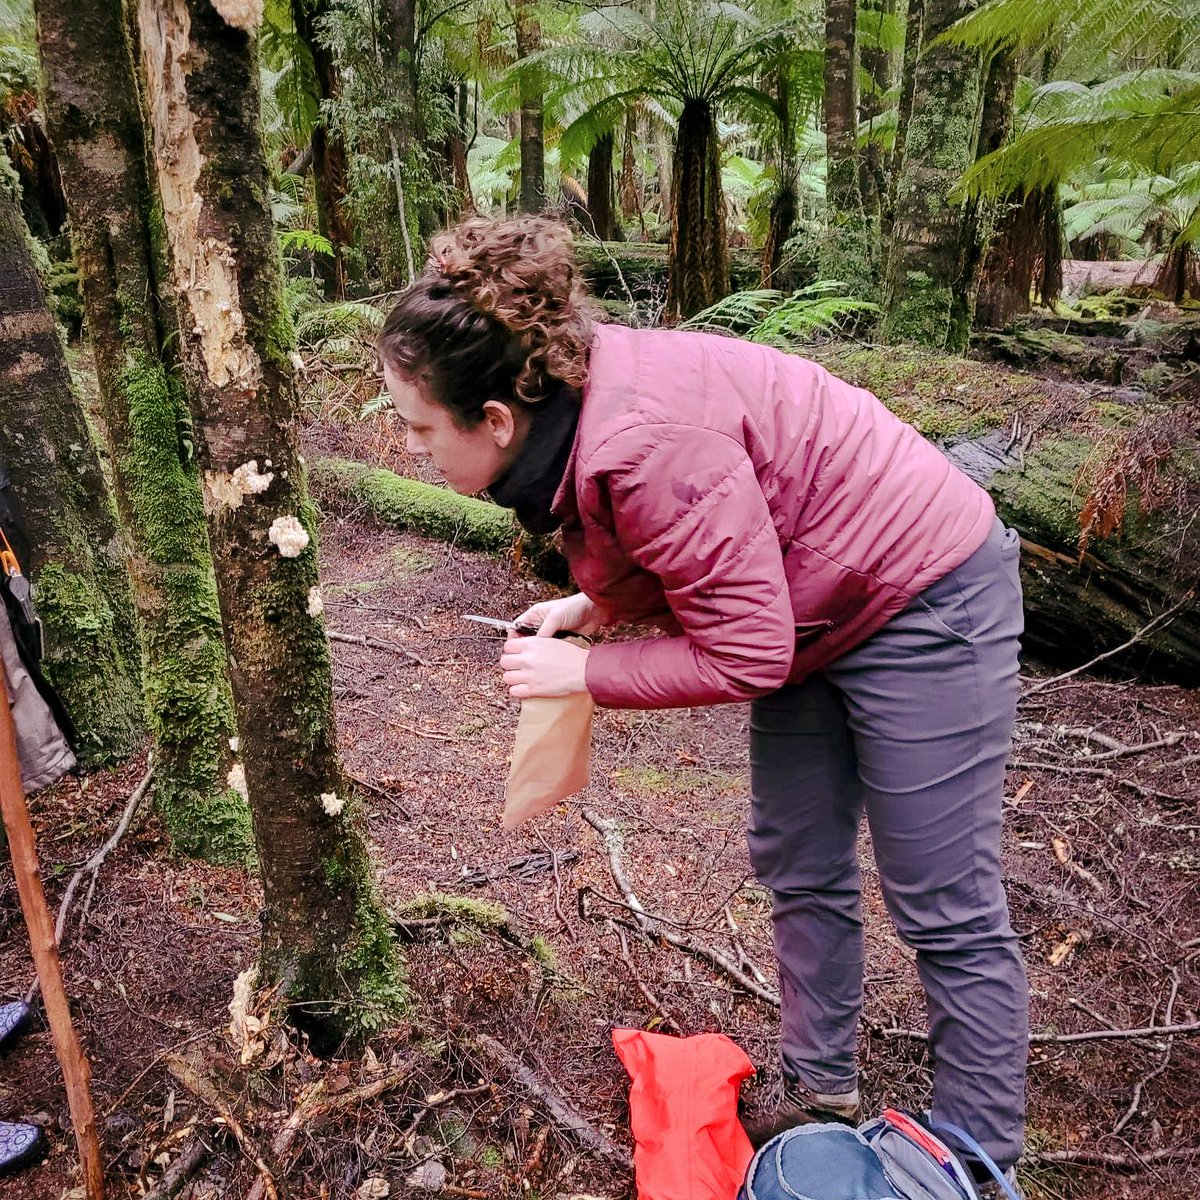 It's National Mushroom Day! @kylieafrancis studies Australia's native mushrooms, exploring their properties, diversity, & health benefits, fousing on lion's mane & other wood-rot mushrooms. She aims to understand our fungal biodiversity & find new molecules for treating diseases.